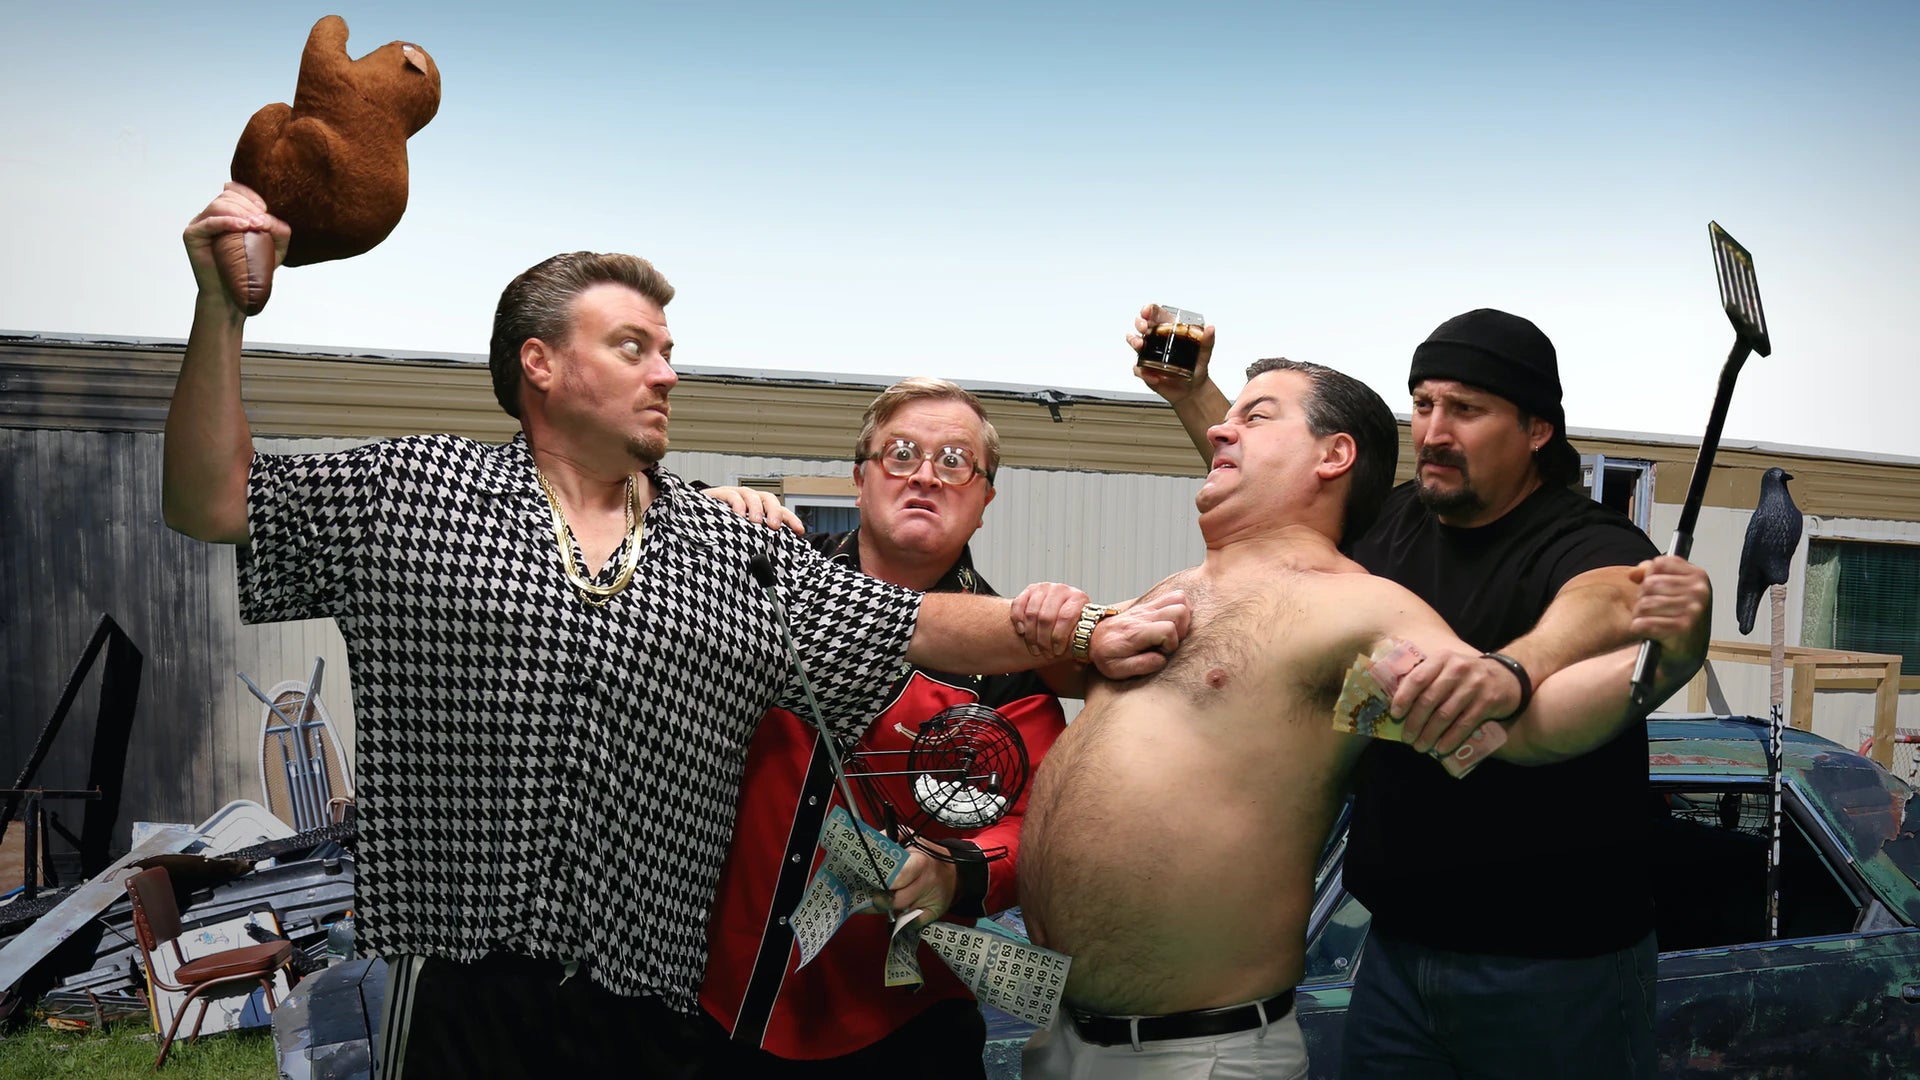 Trailer Park Boys: Dressed All Over - The Complete Collection